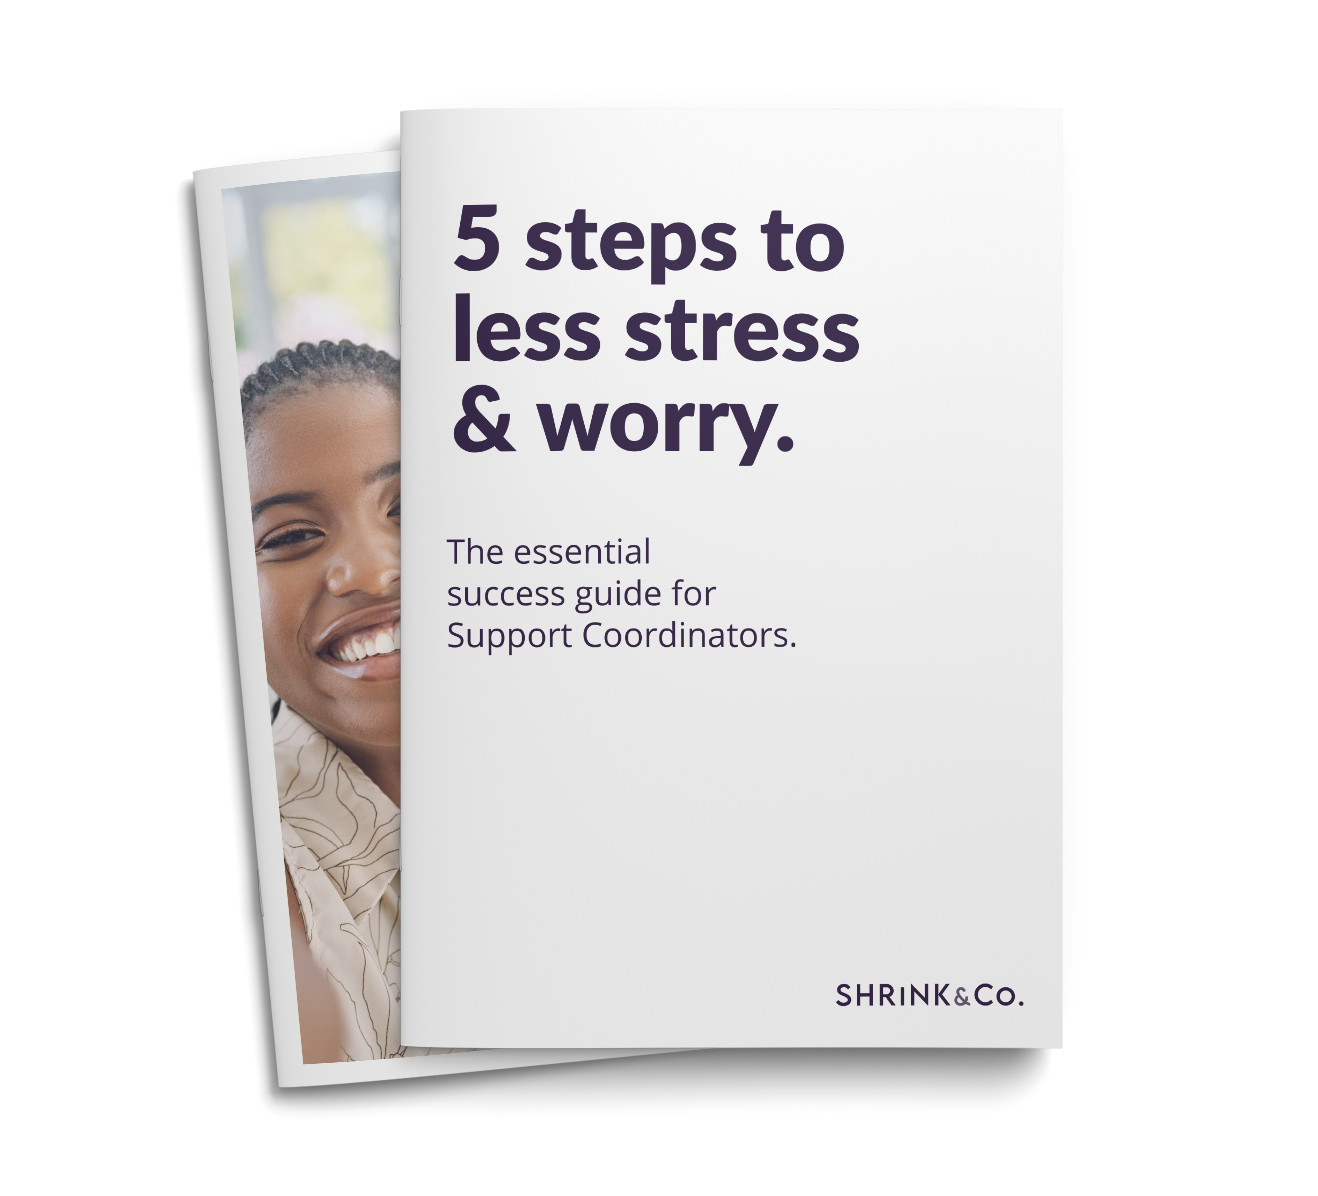 5 Steps to less stress and worry booklet | Shrink & Co. | Support Coordinators